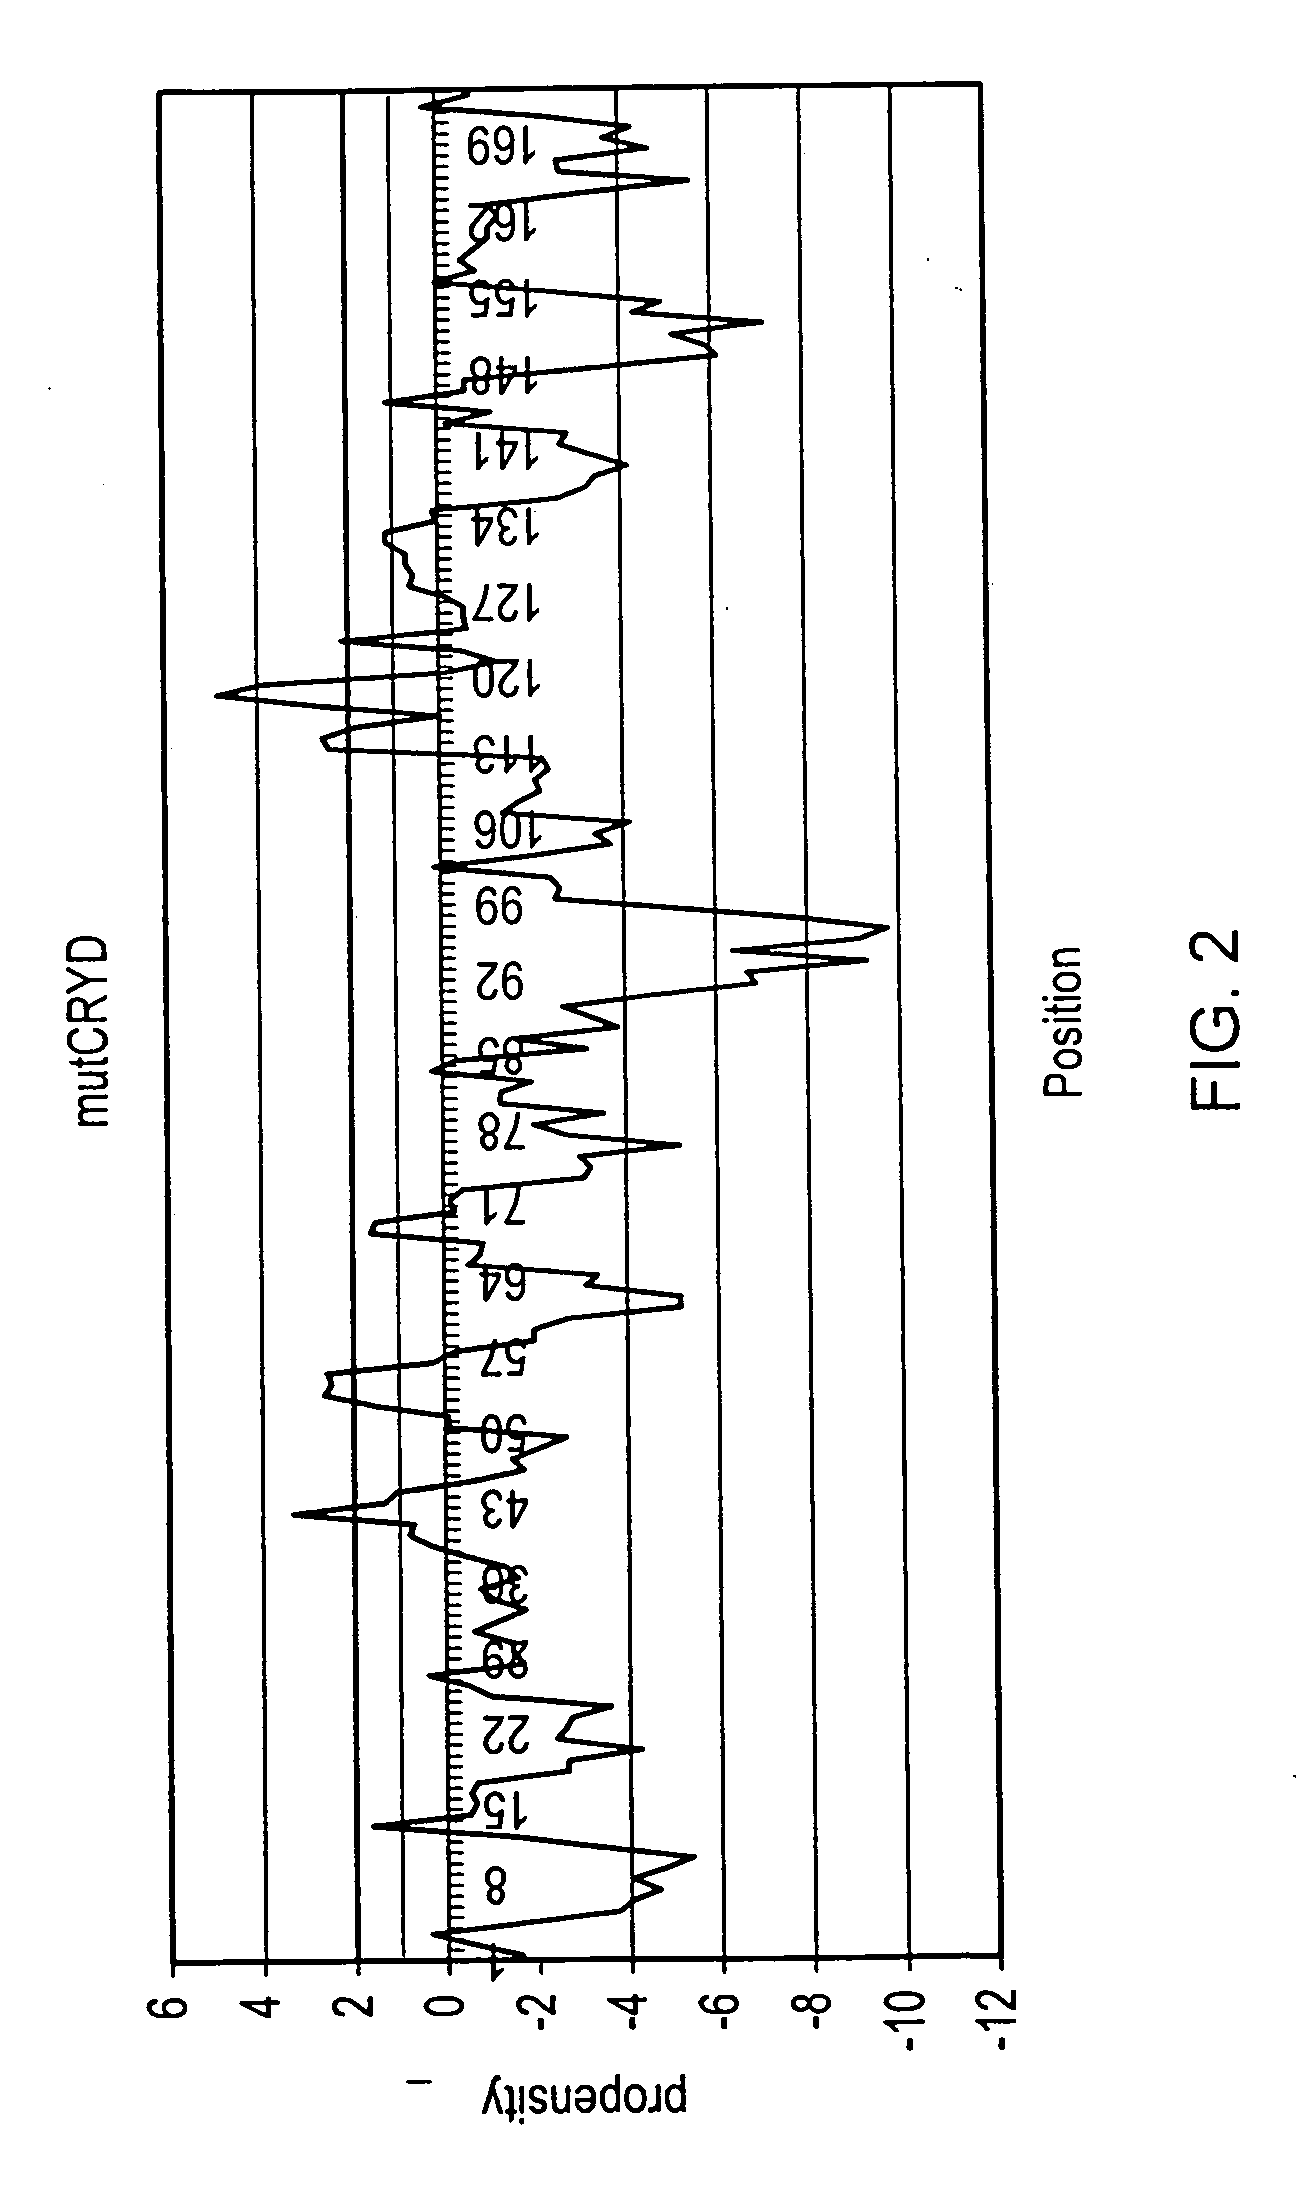 Method for predicting protein aggregation and designing aggregation inhibitors